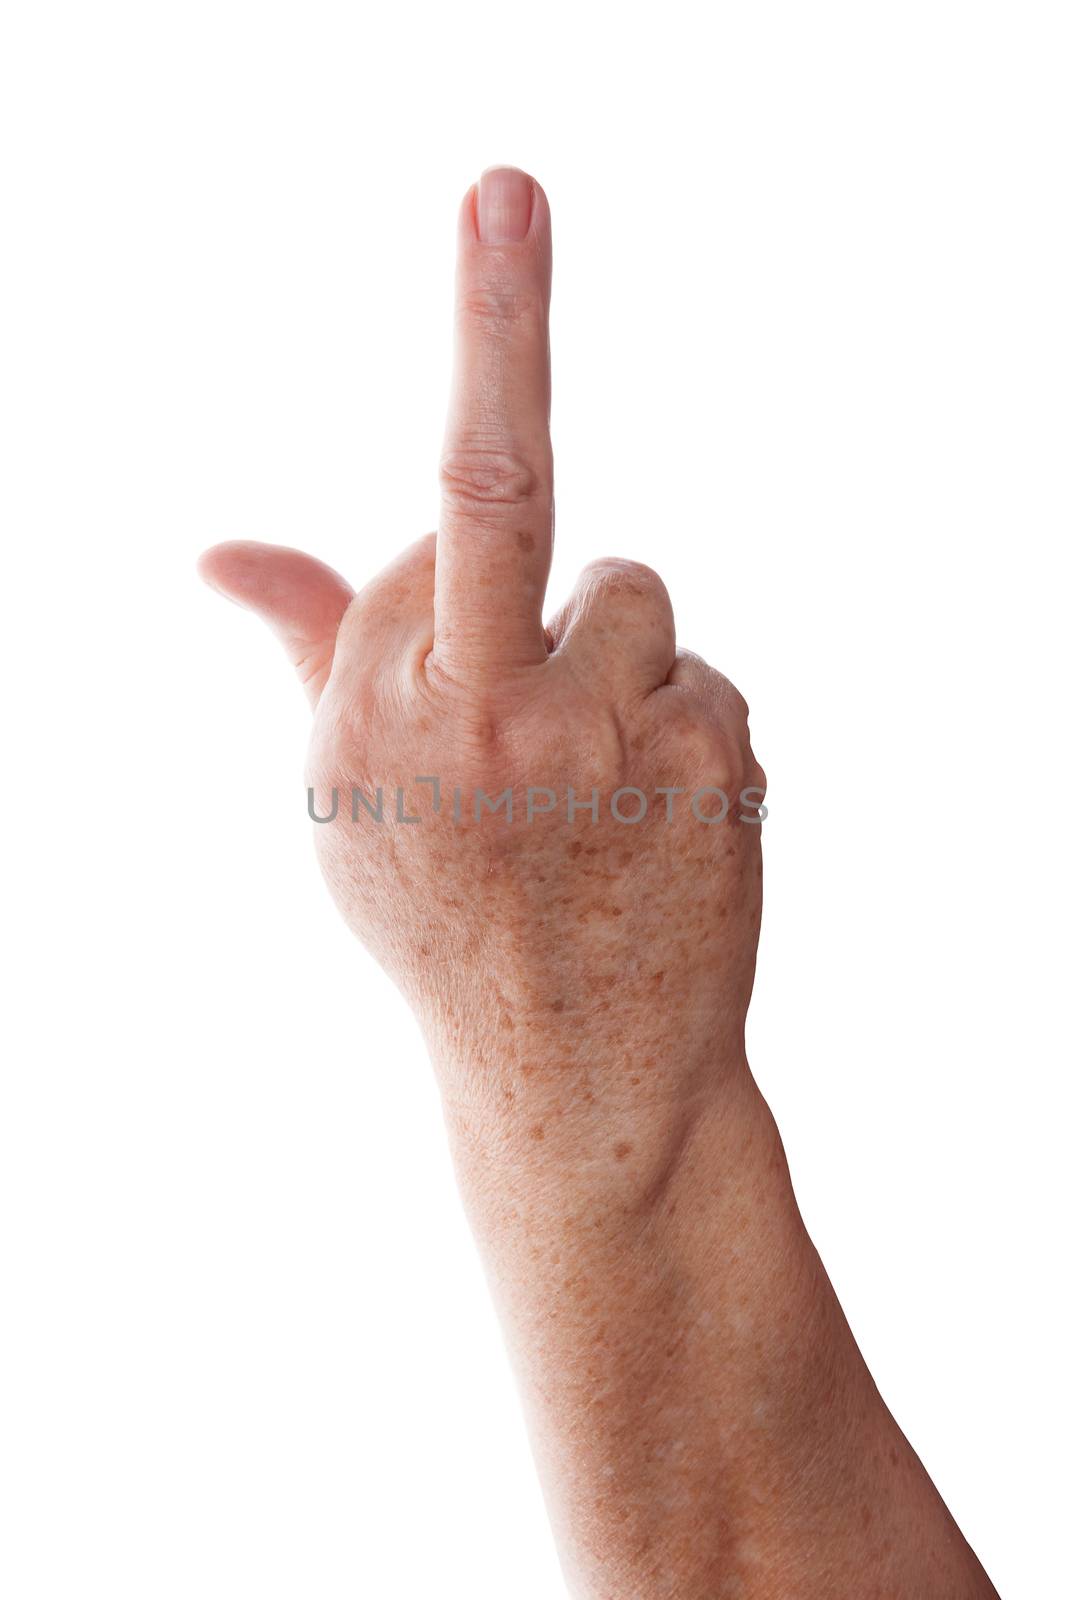 Old female hand showing the middle finger isolated on white background. Obscene hand gesture.